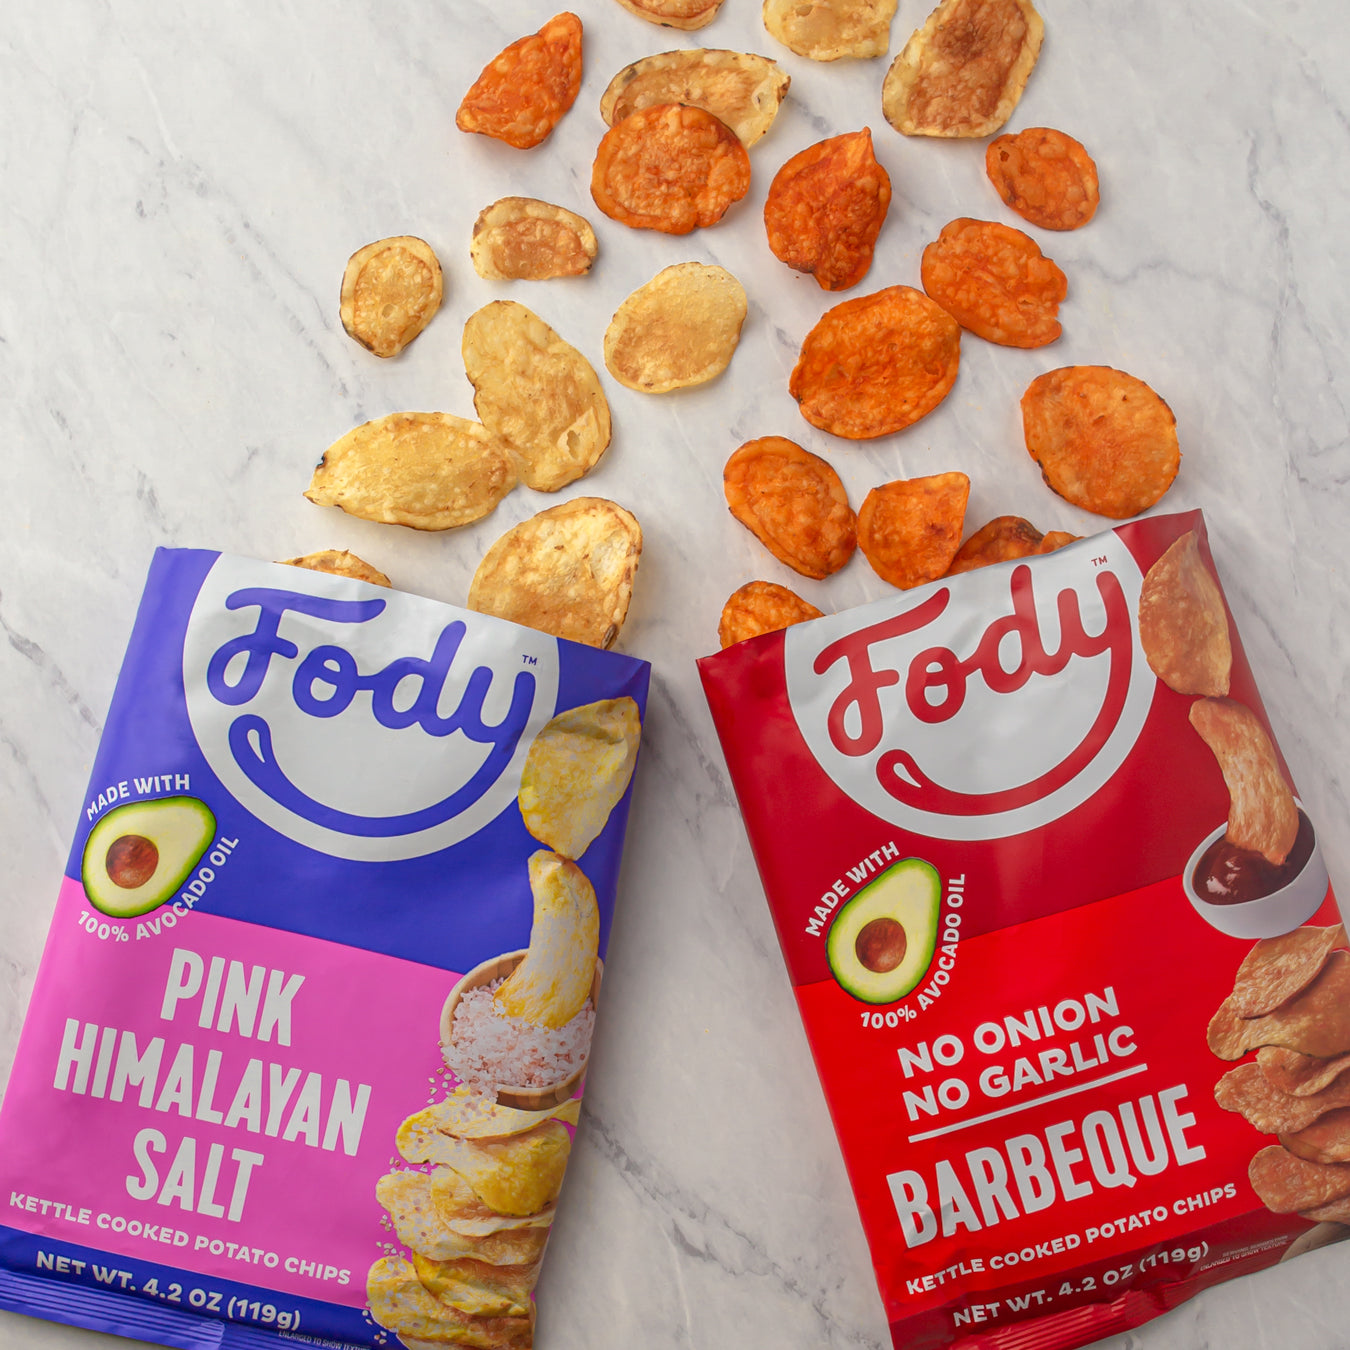 Fody BBQ chips and Fody Pink Himalayan Salt chips